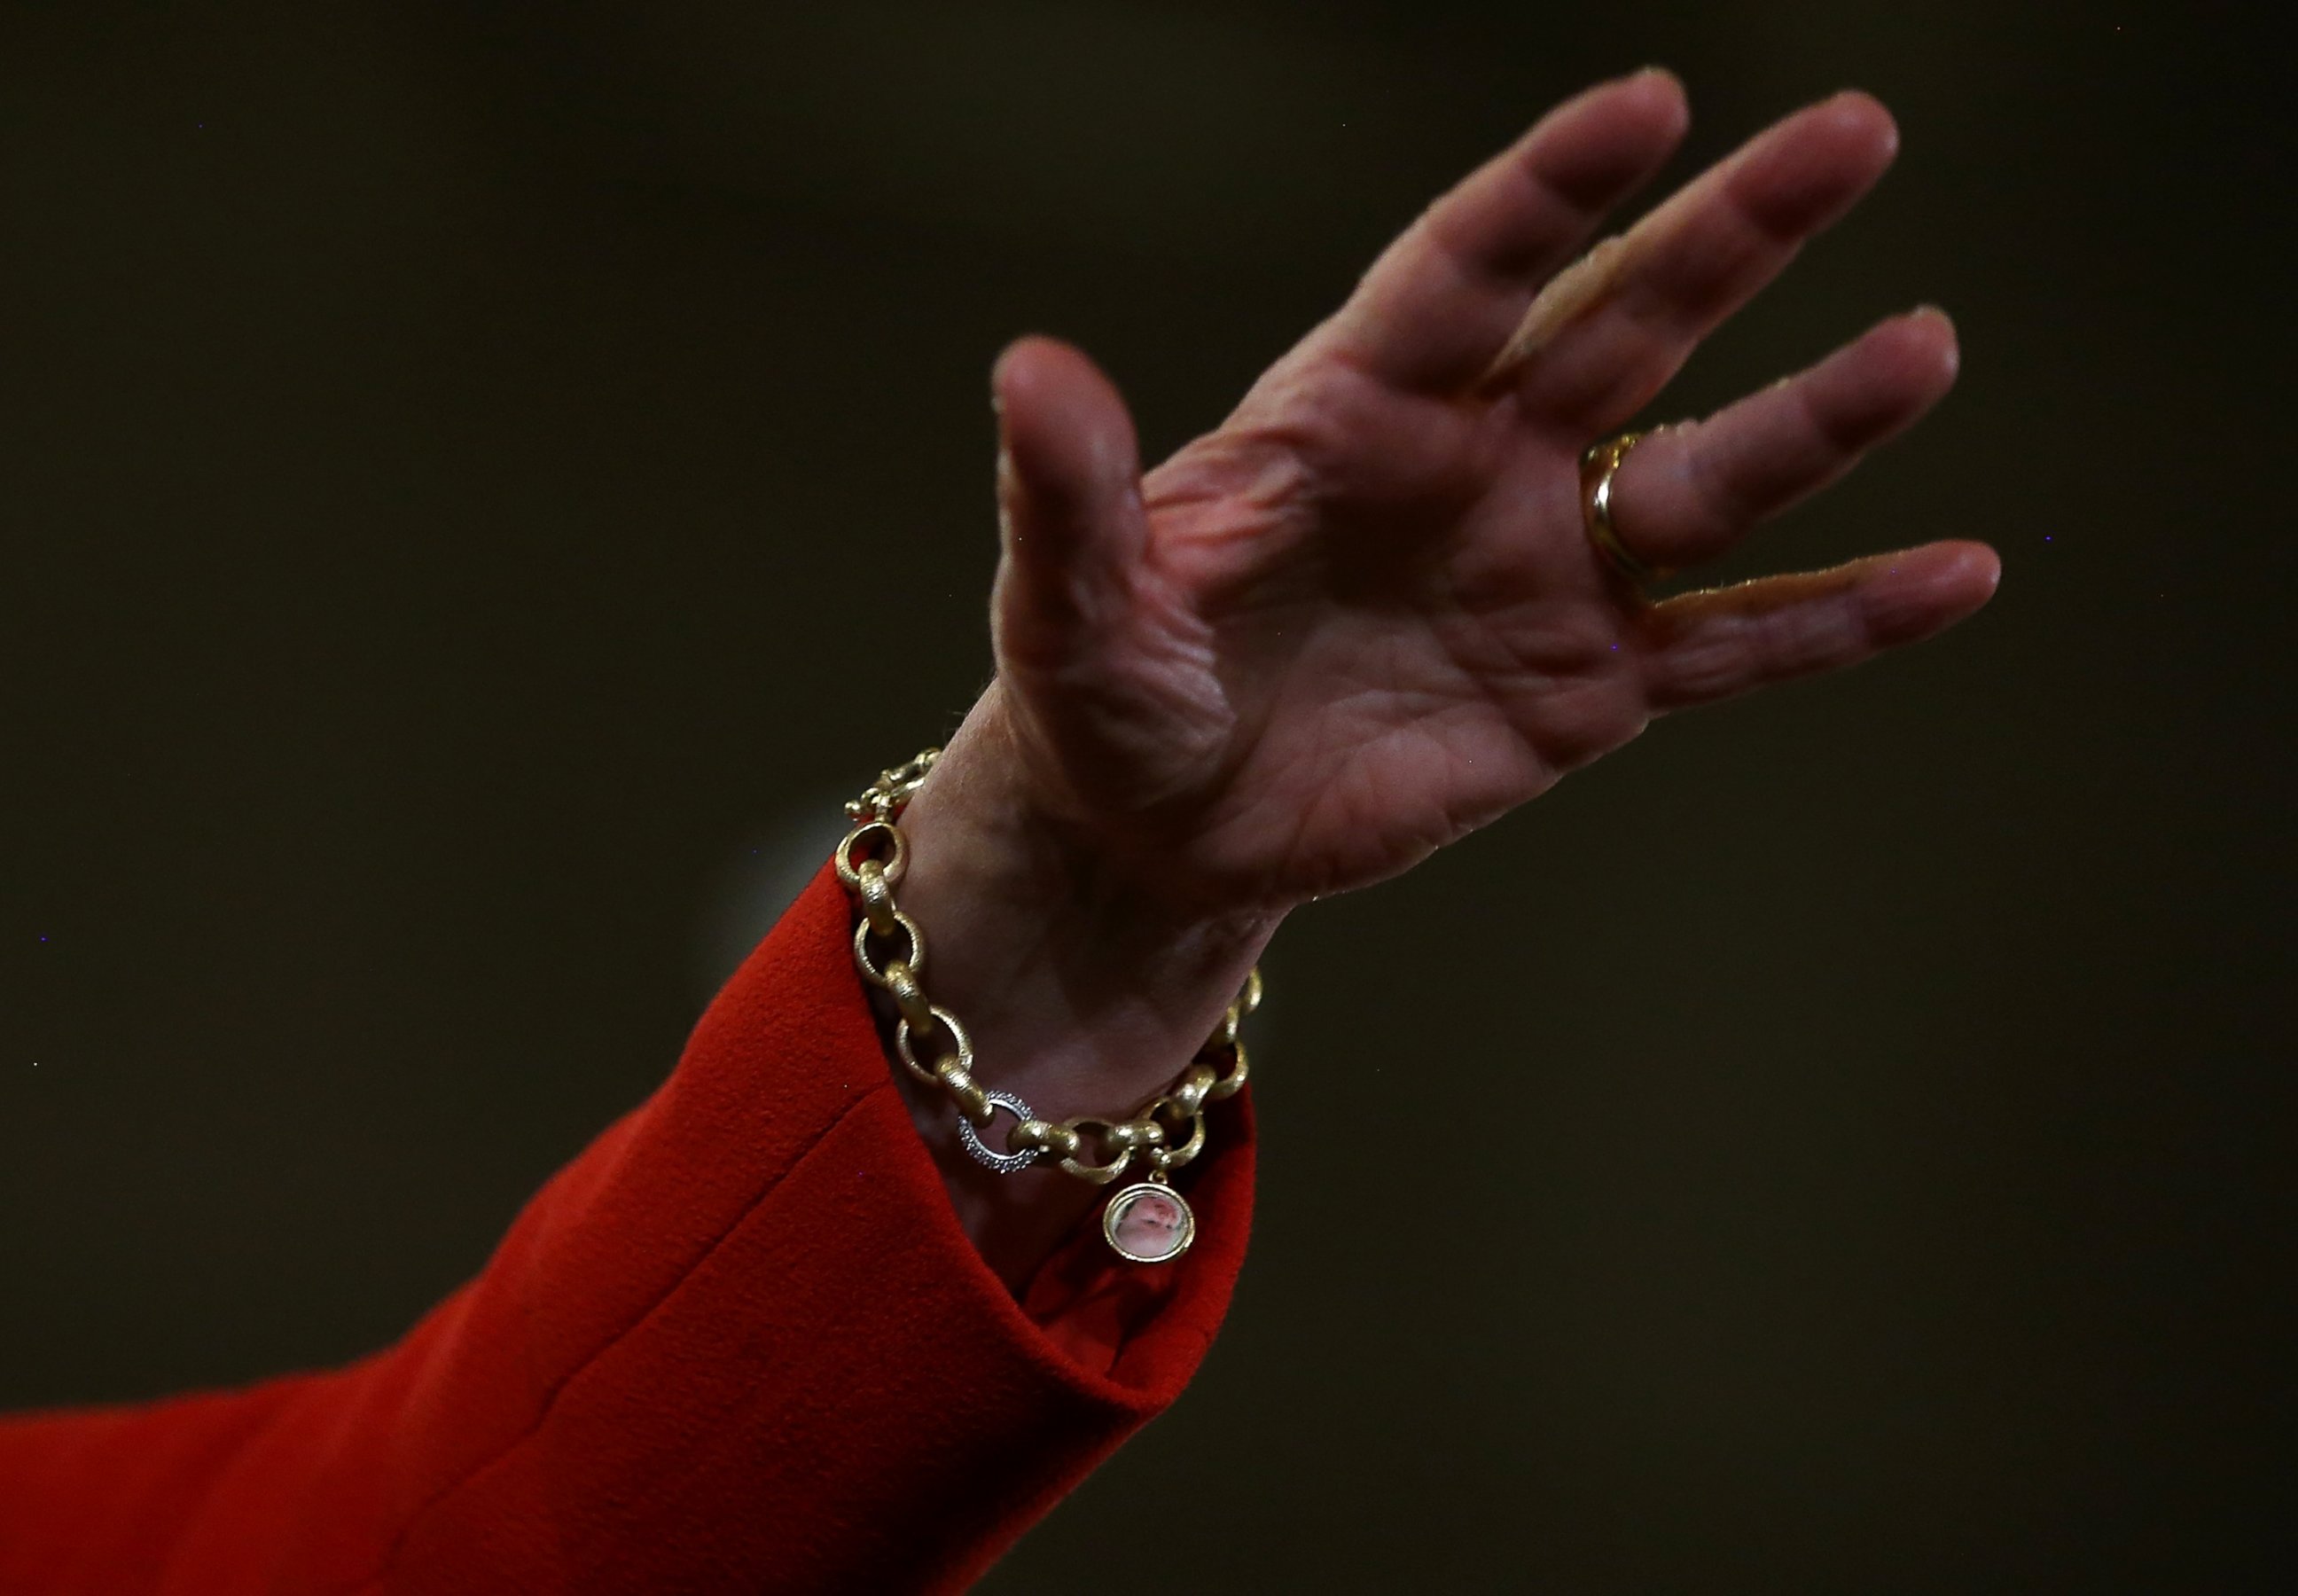 PHOTO: Democratic presidential candidate Hillary Clinton wears a charm bracelet with an image of her granddaughter Charlotte Clinton Mezvinsky as she speaks during a Bronx Organizing Event on April 13, 2016 in the Bronx borough of New York.